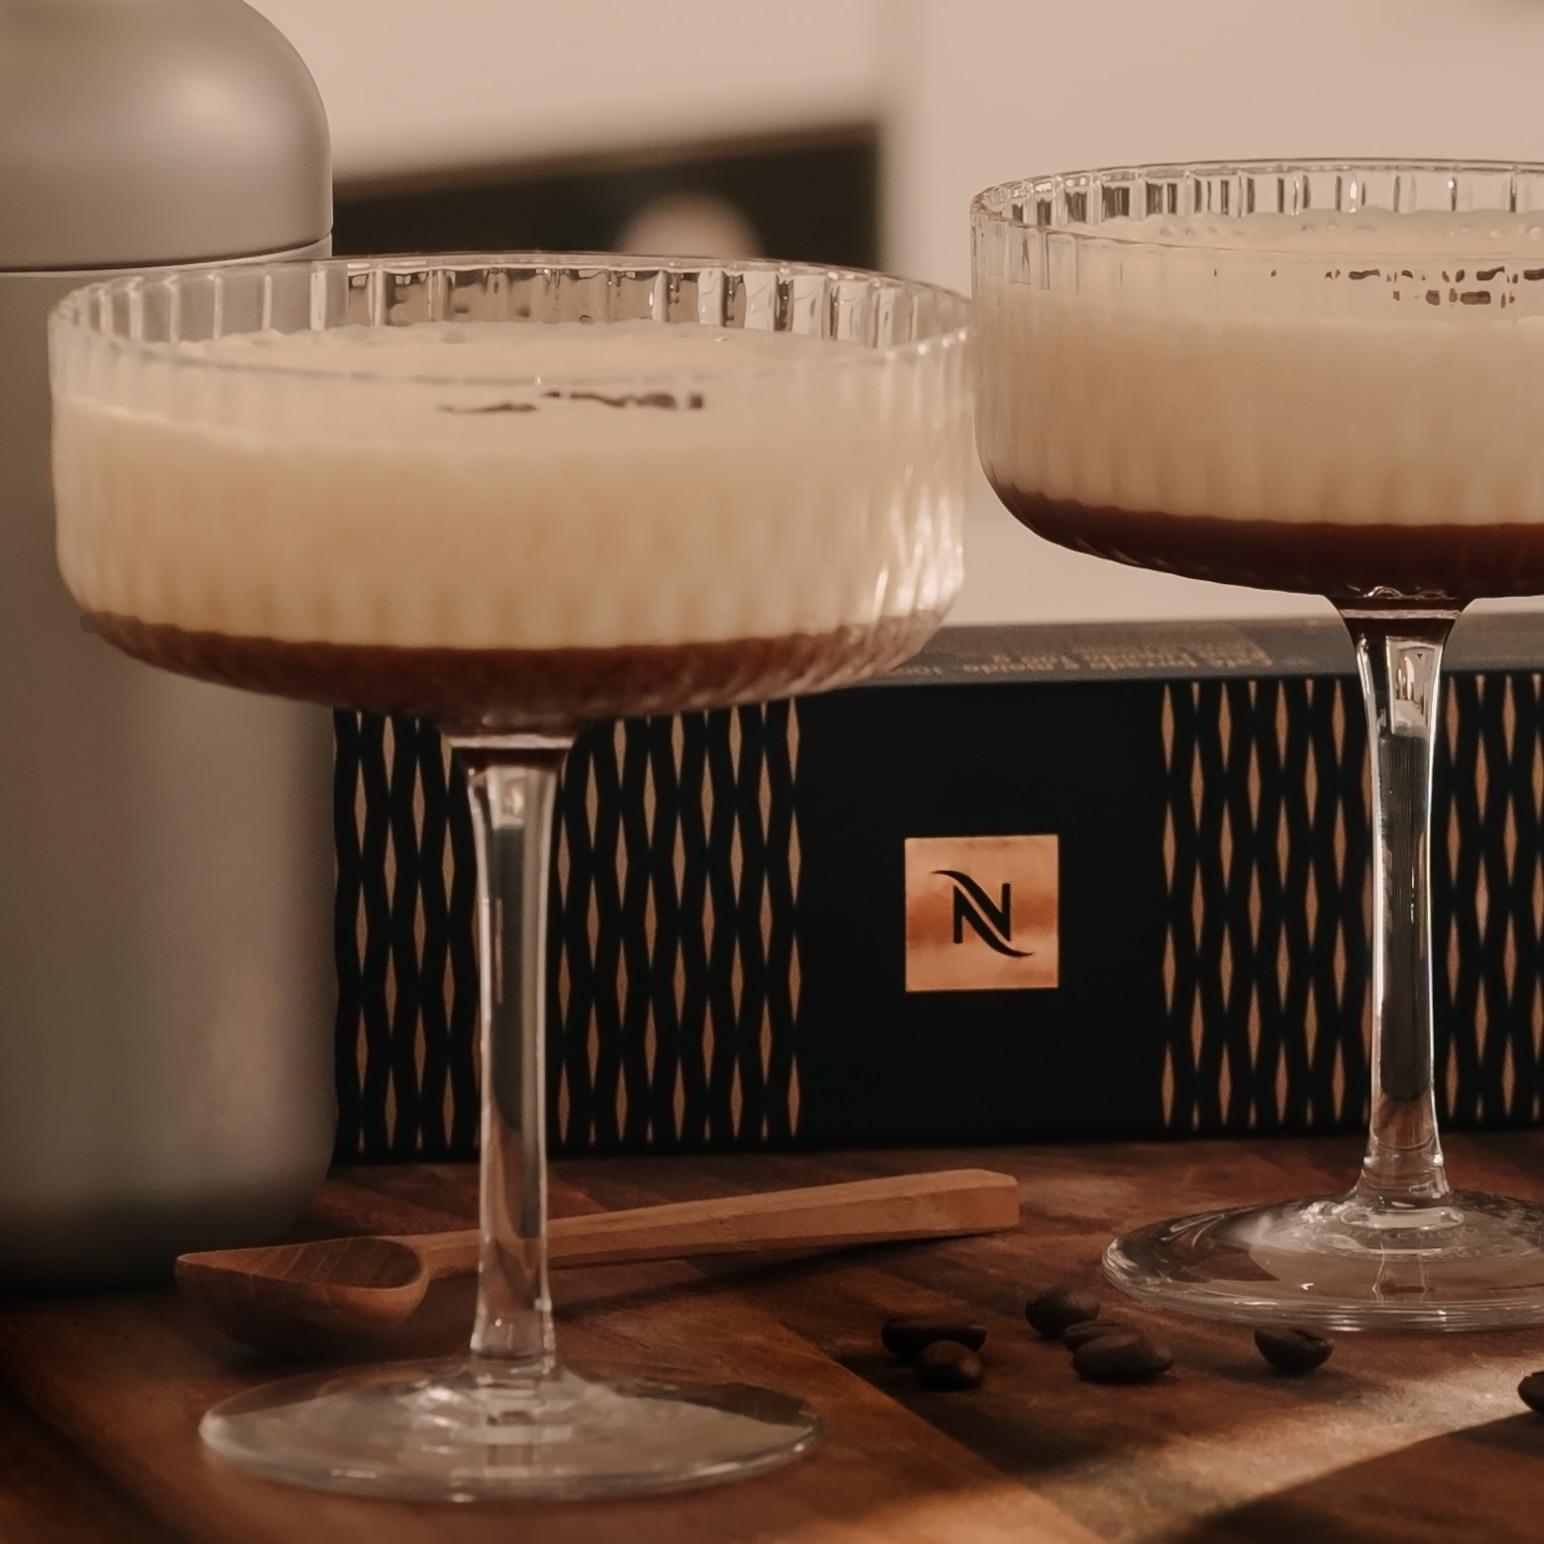 Nespresso 230ml pods, how do I make it work for me? (Pictured below is double  espresso scuro though) : r/nespresso